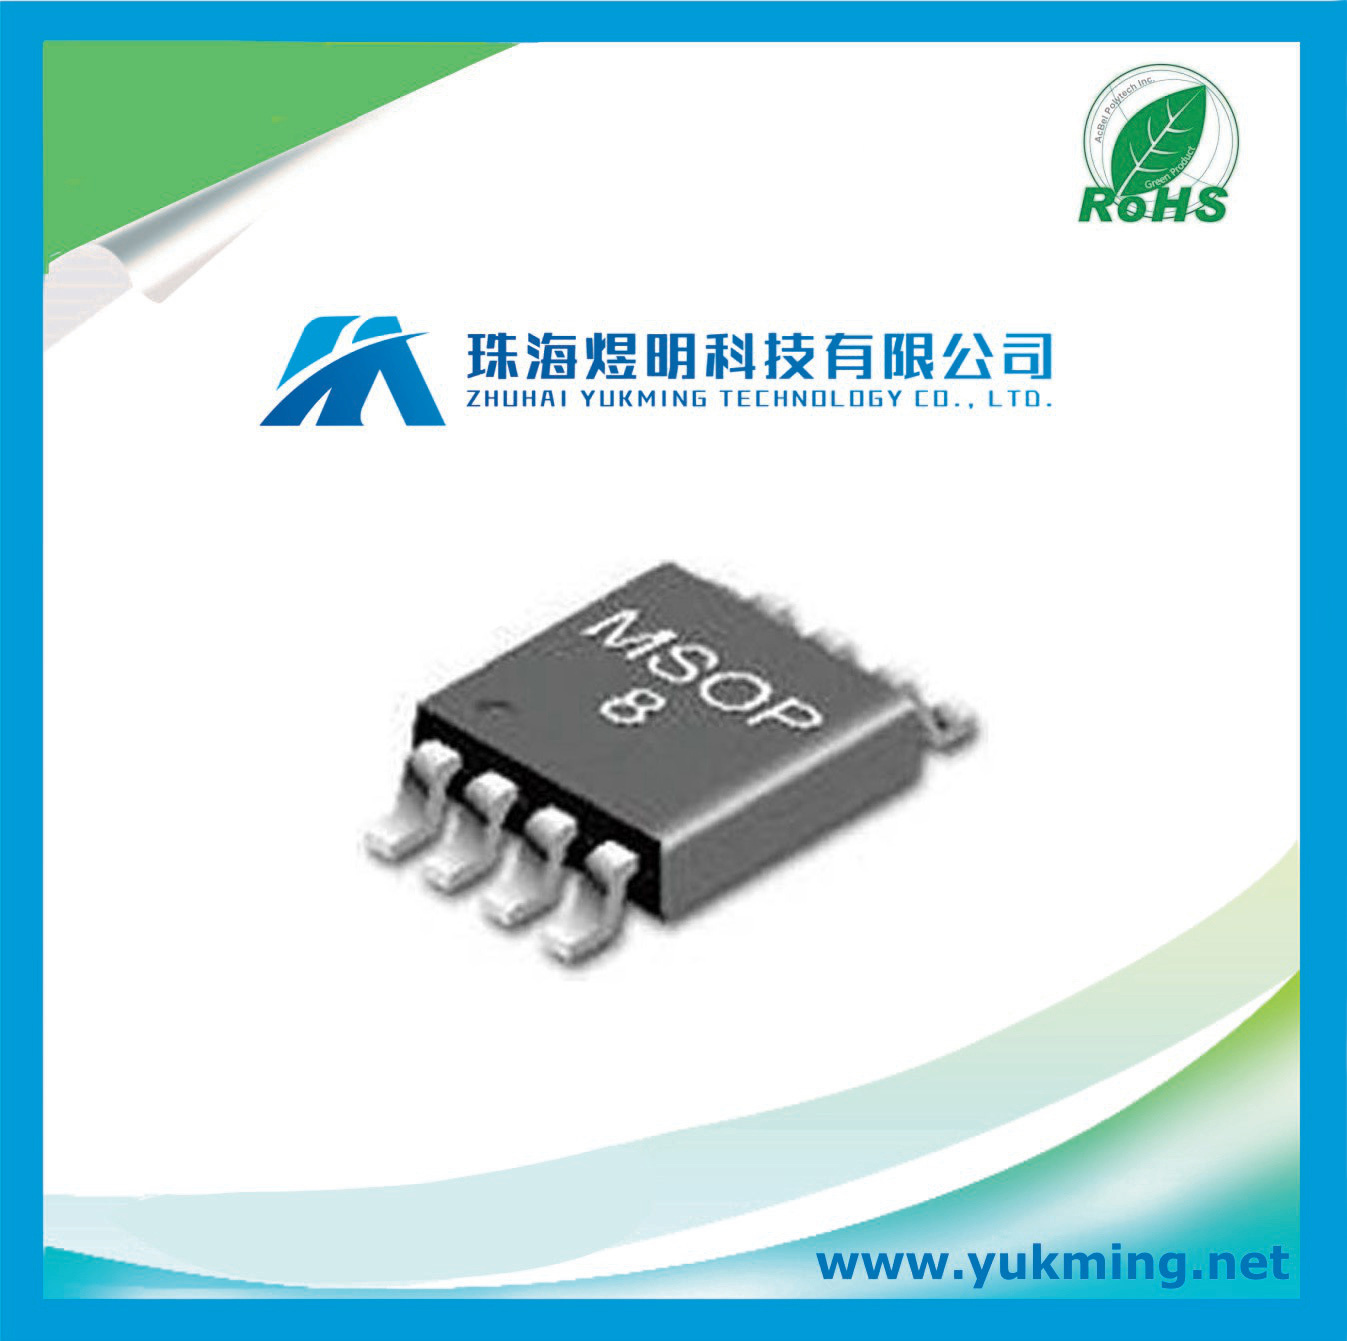 Integrated Circuit Ds1339u-33+ of Real-Time Clock IC